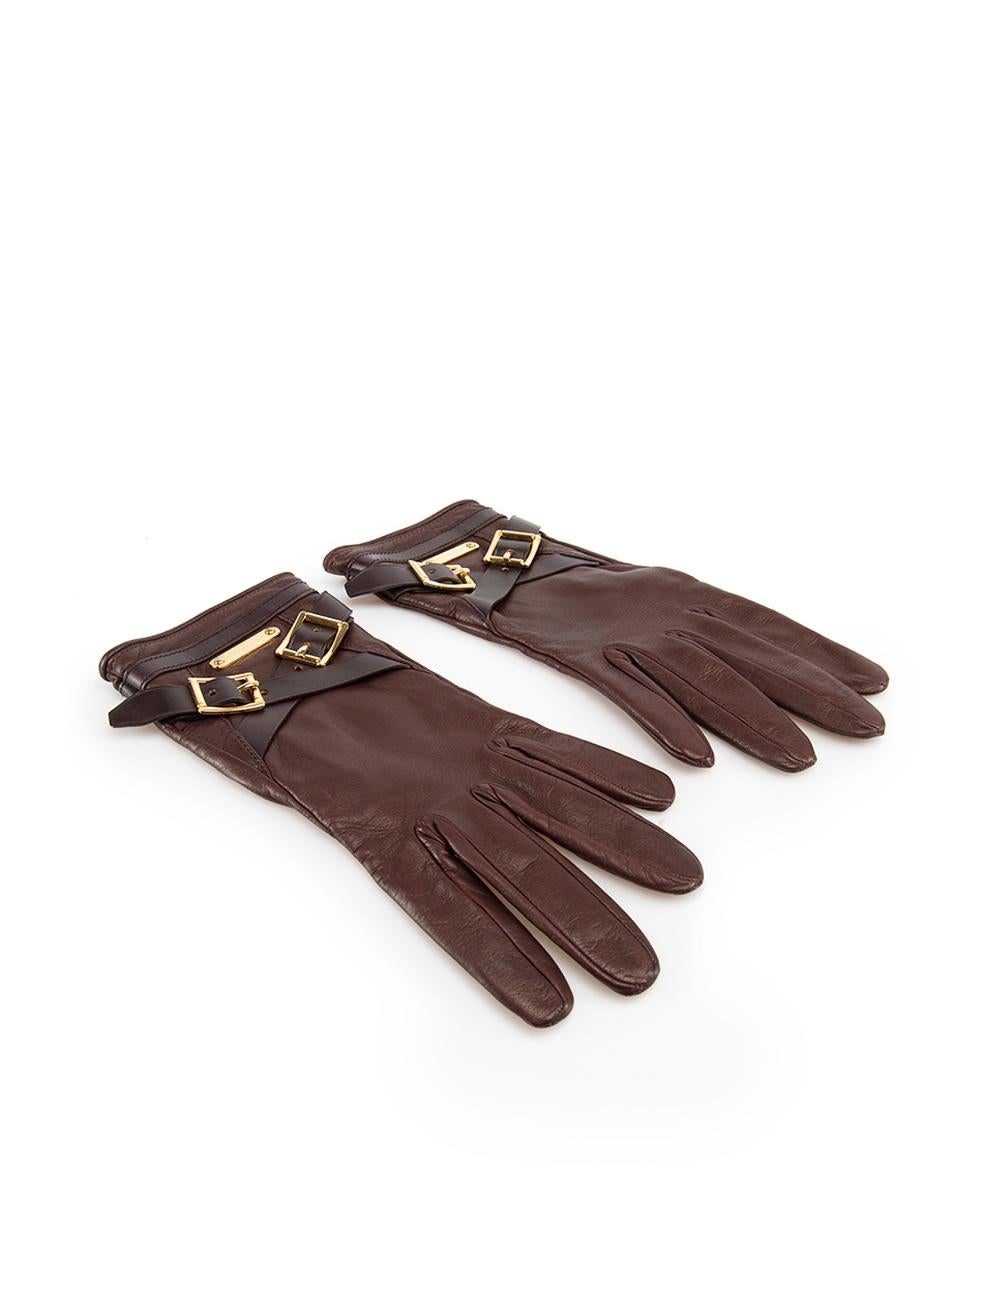 CONDITION is Very good. Minimal wear to gloves is evident. Minimal wear to the left glove index finger and the right glove leather strapping with very light scratches to the leather on this used Burberry designer resale item.
 
 Details
 Burgundy
